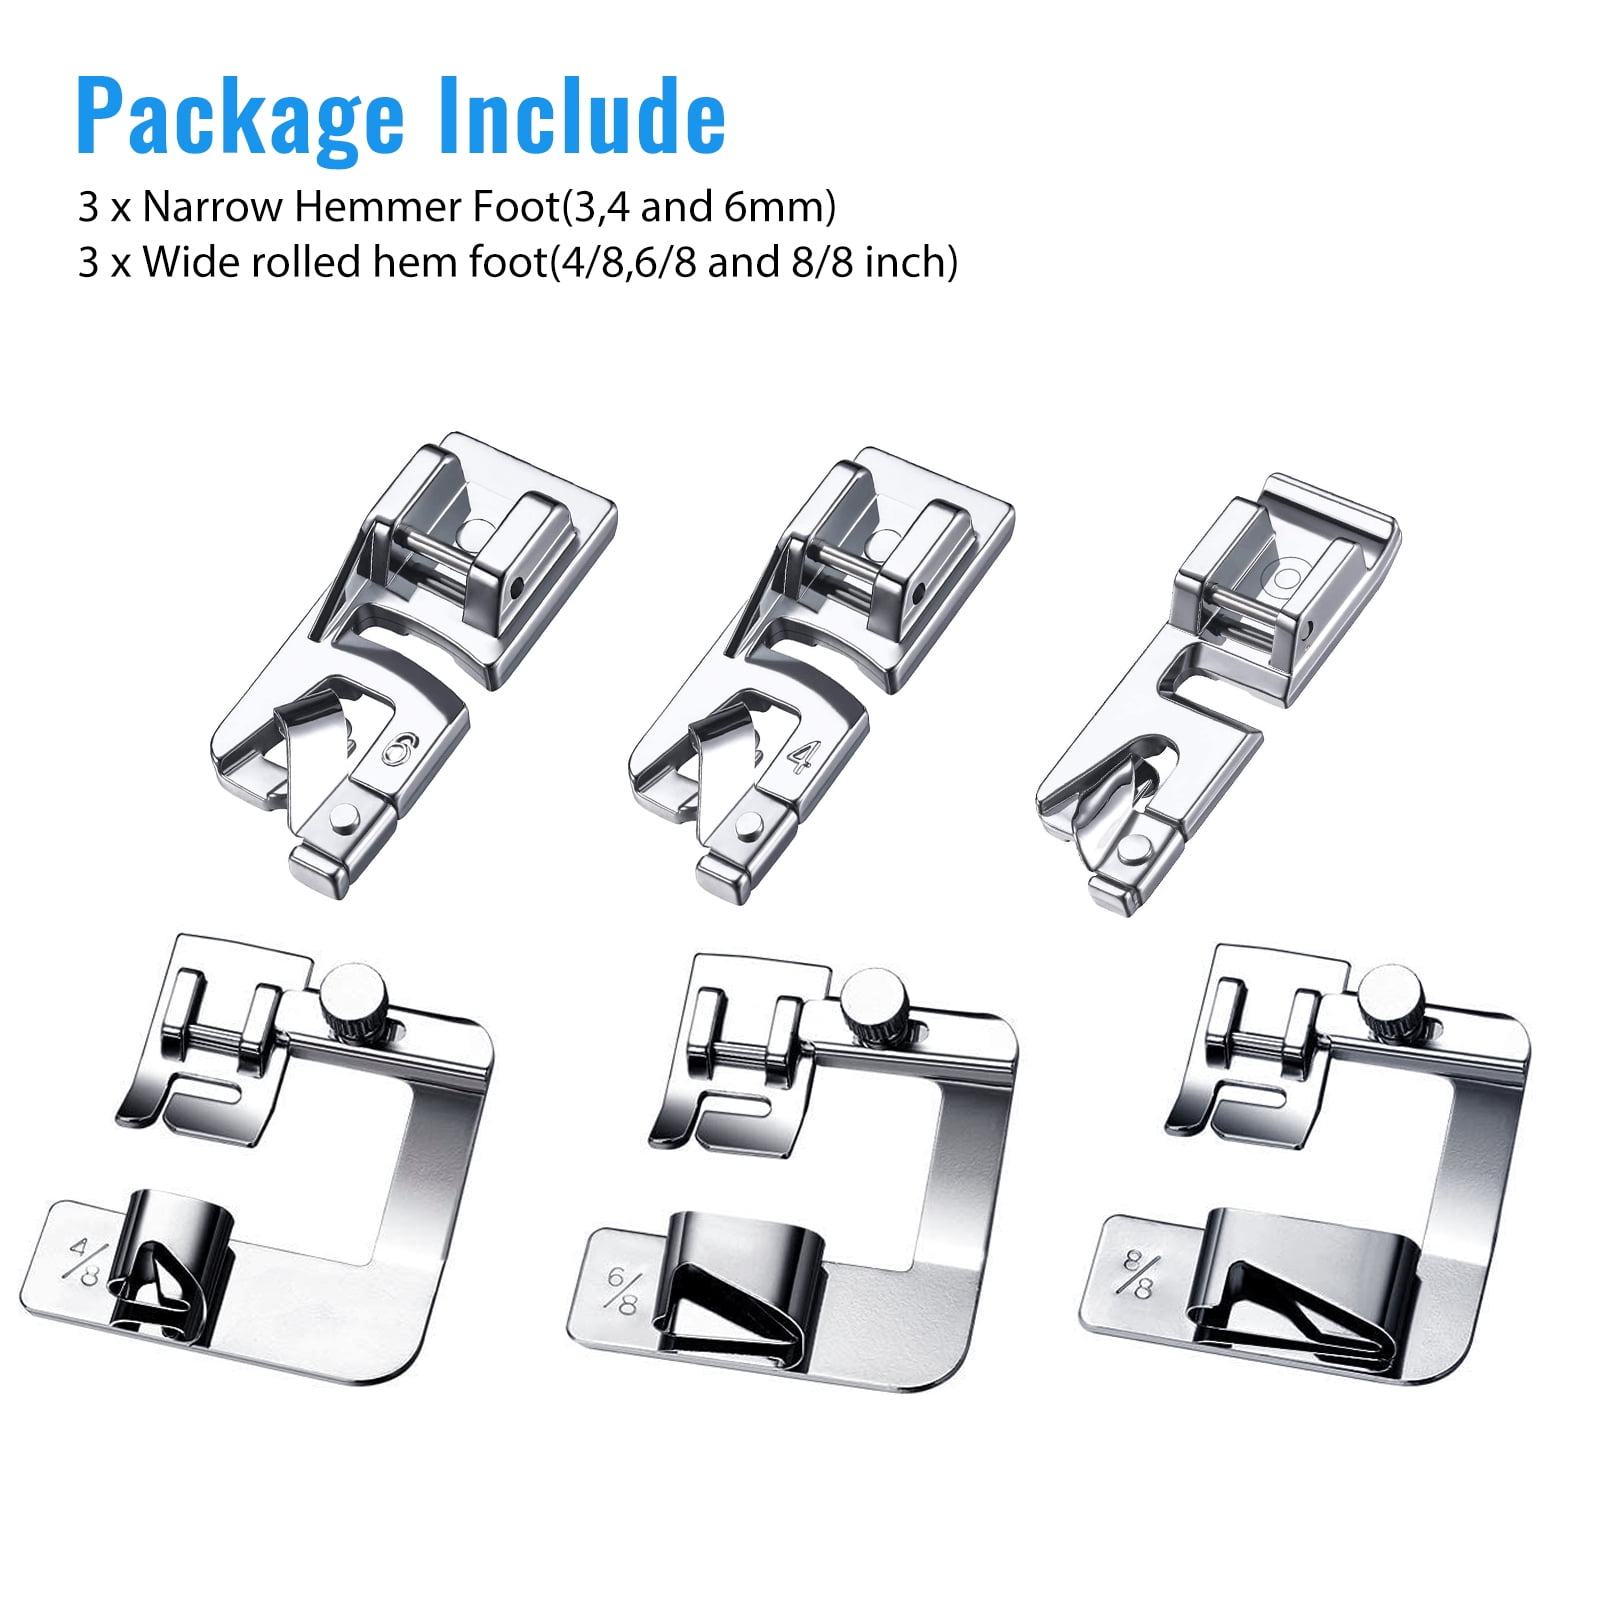 6pcs Sewing Rolled Hemmer Foot, 3mm-8mm Wide Narrow Rolled Hem Sewing Machine Presser Foot Kit,Sewing Machine Presser Foot Hemmer Foot,Seam Guide